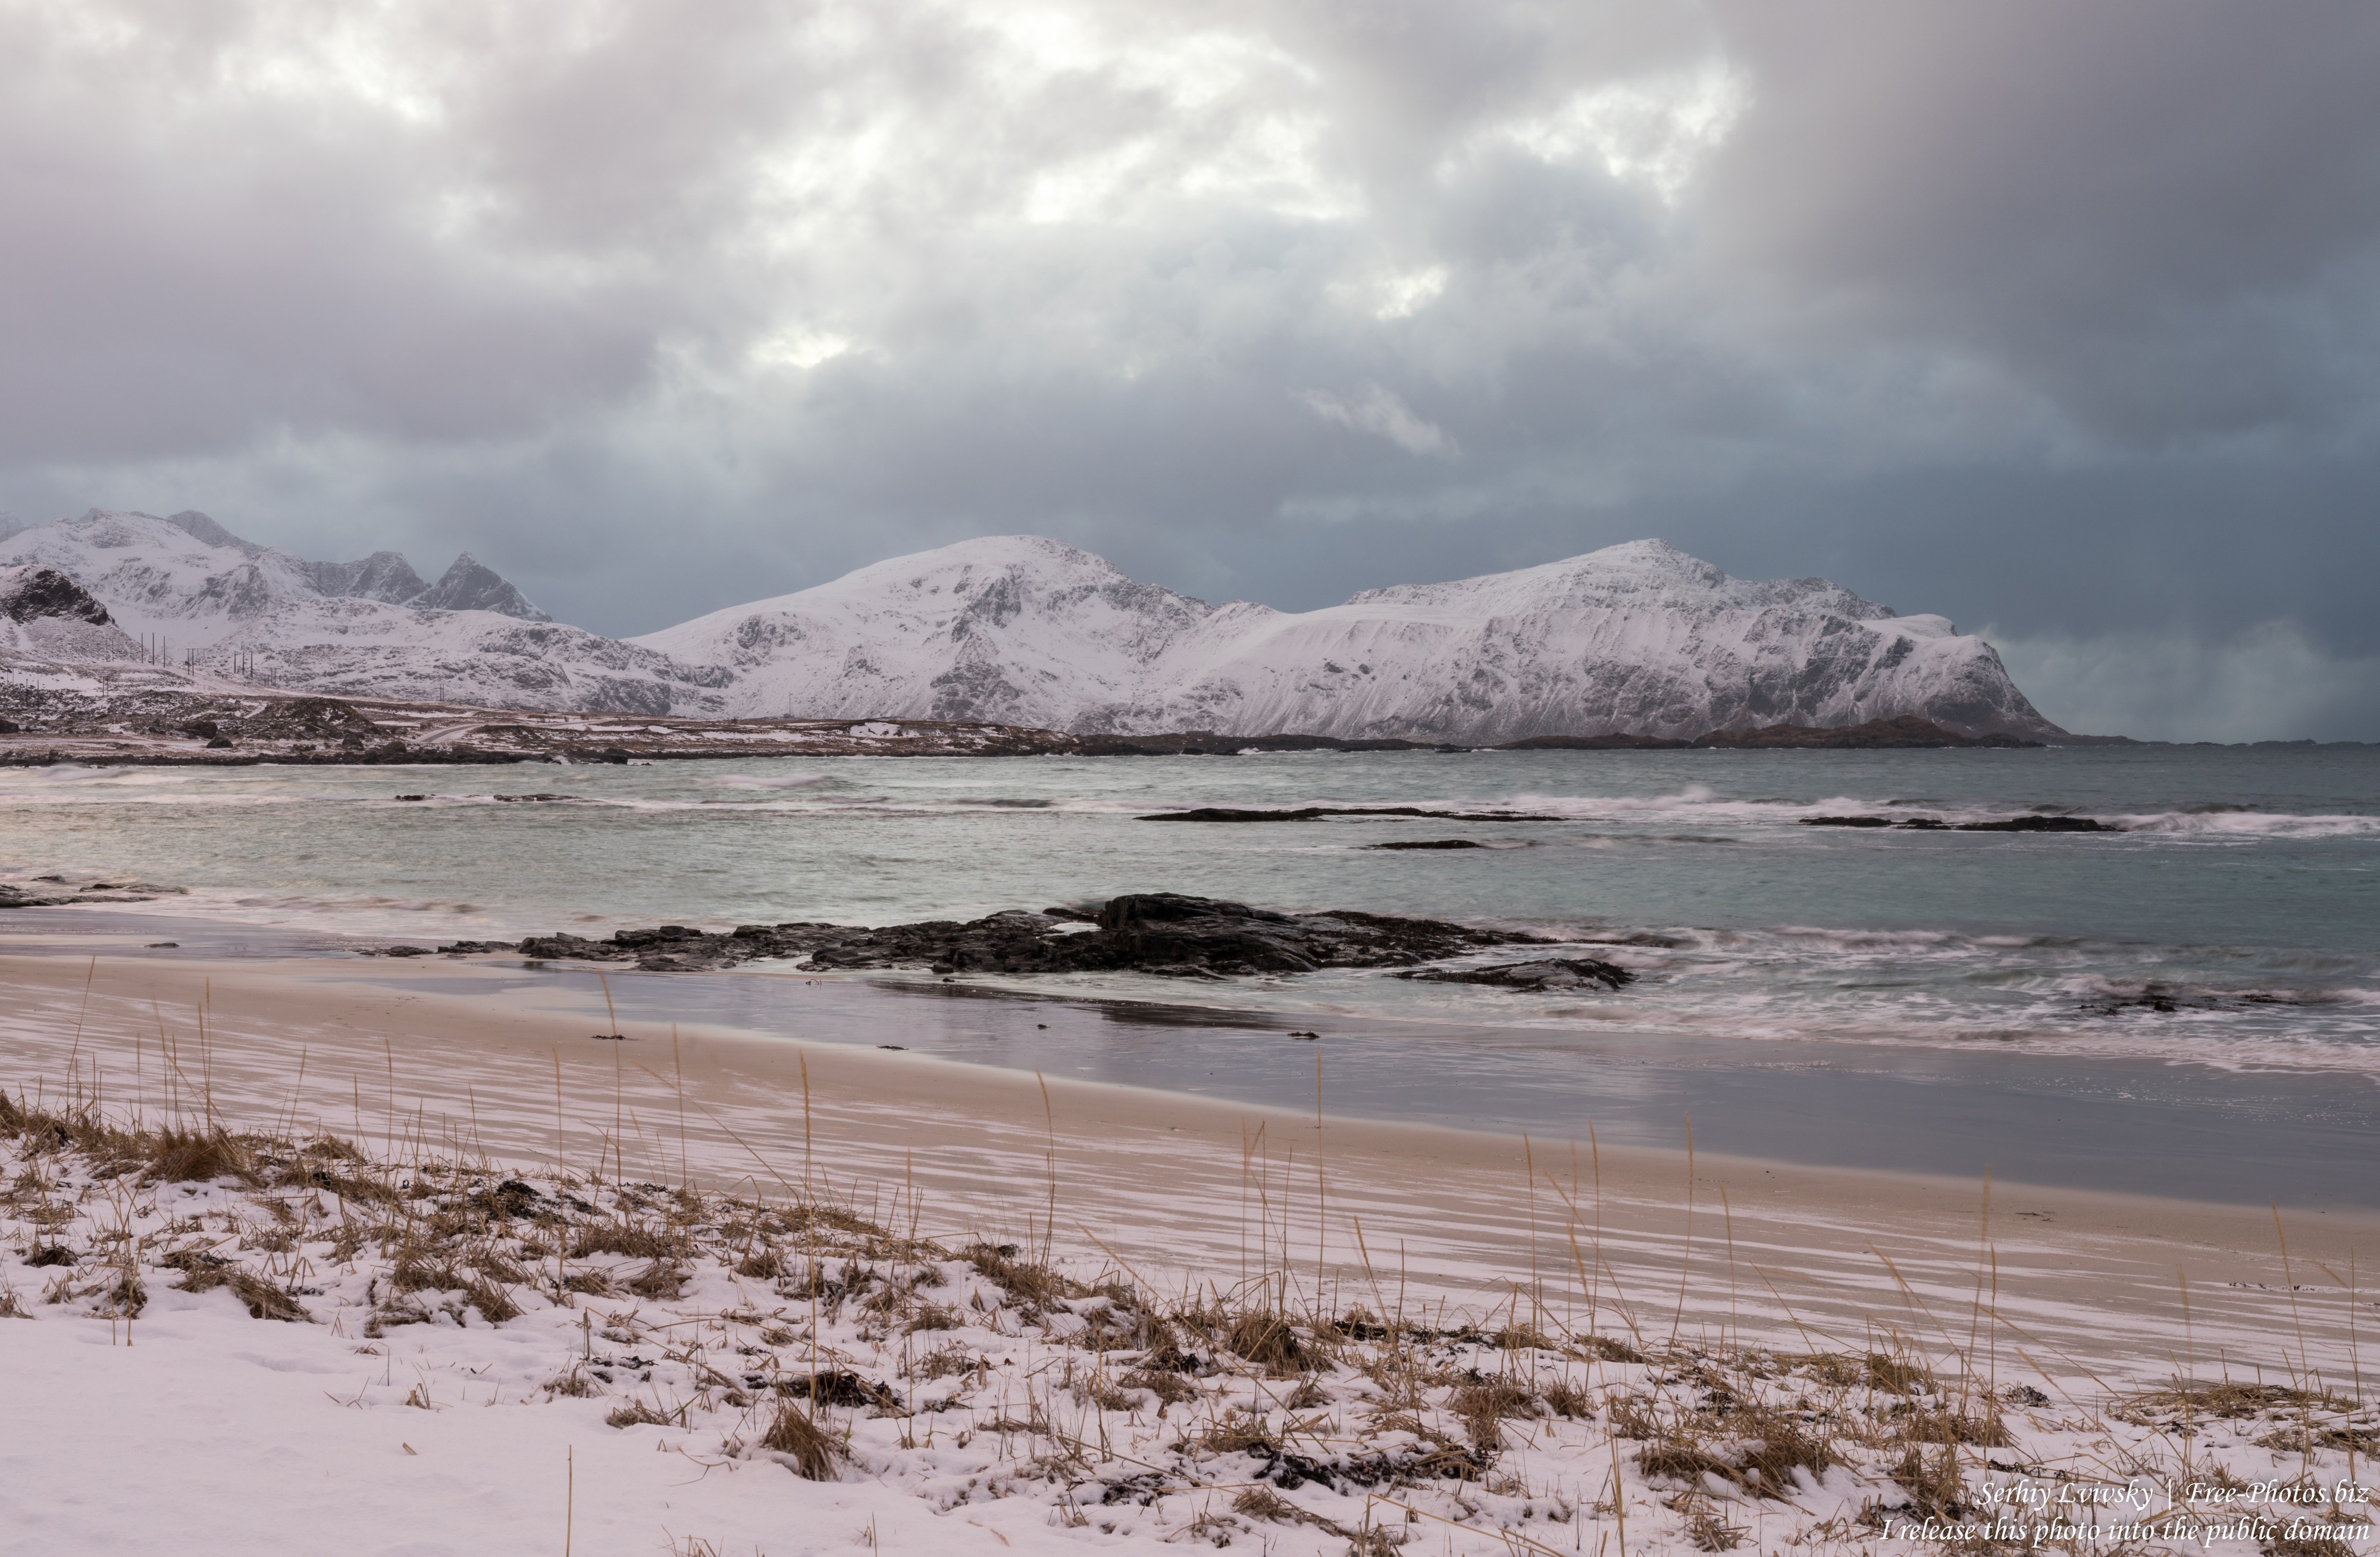 Skagsanden beach, Norway, photographed in February 2020 by Serhiy Lvivsky, picture 11